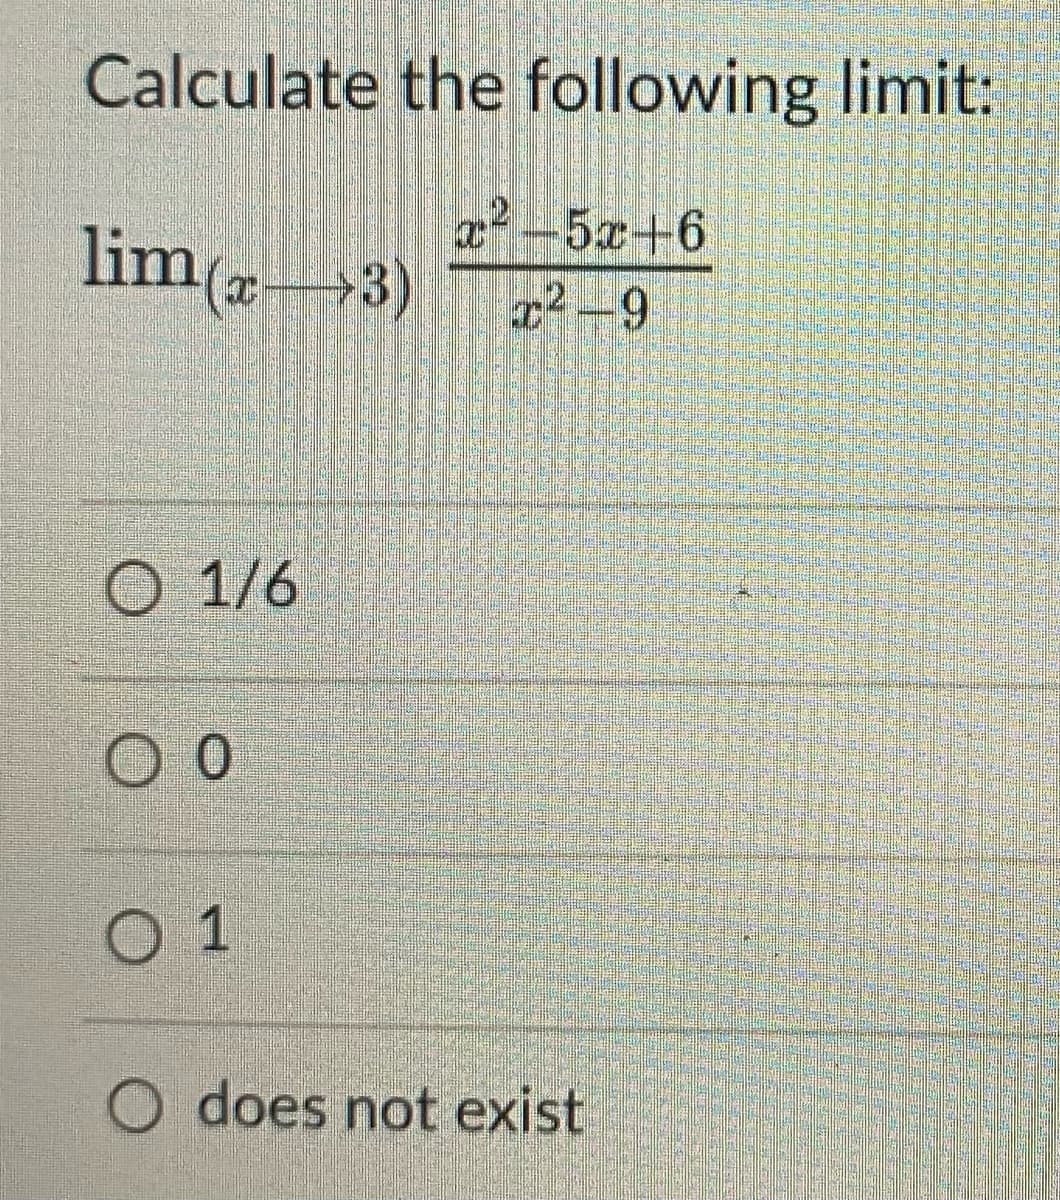 Calculate the following limit:
a5x+6
lim
ax→3)
1/6
0 1
O does not exist
